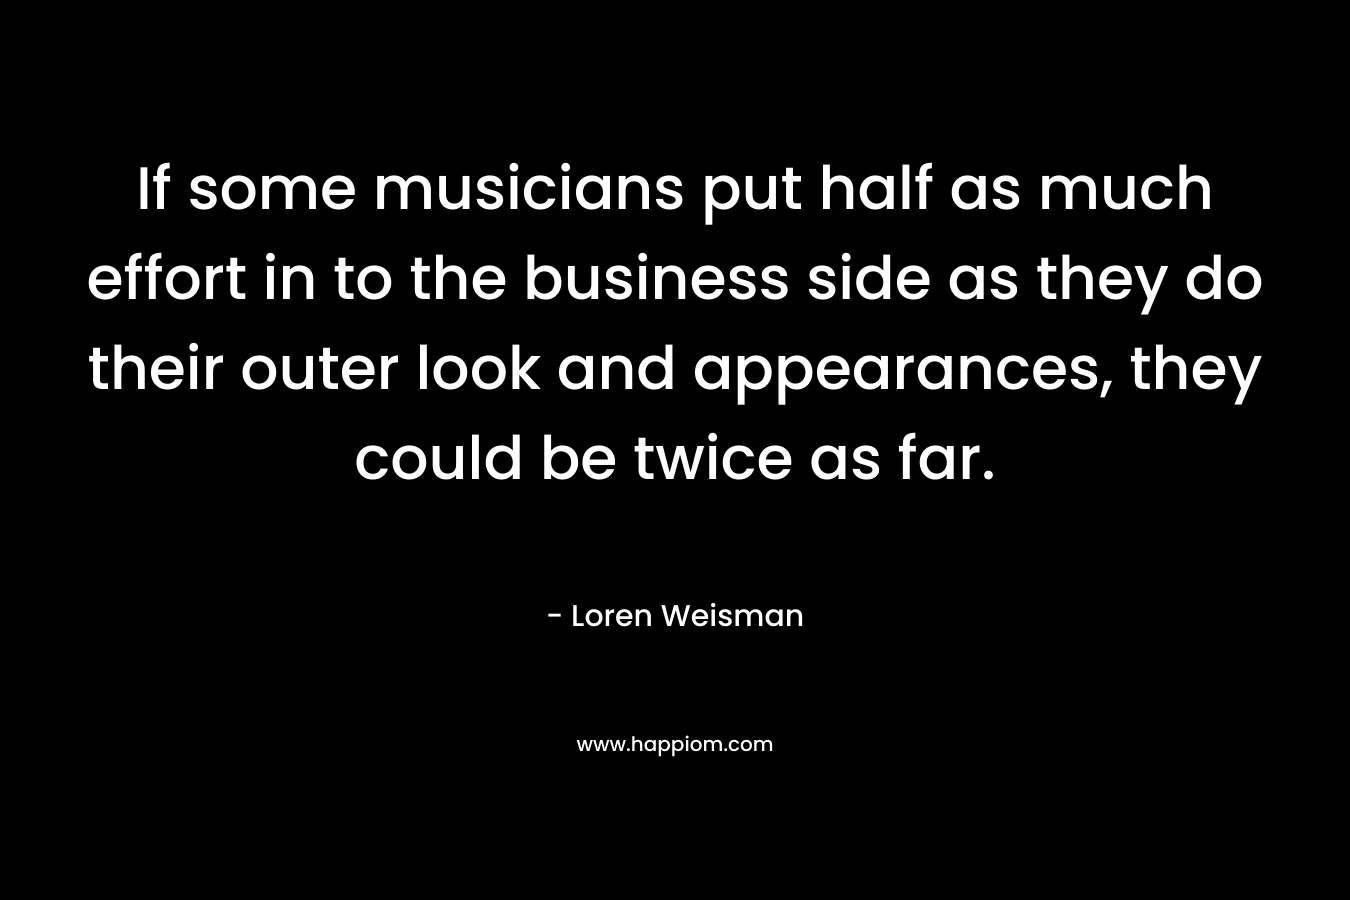 If some musicians put half as much effort in to the business side as they do their outer look and appearances, they could be twice as far.